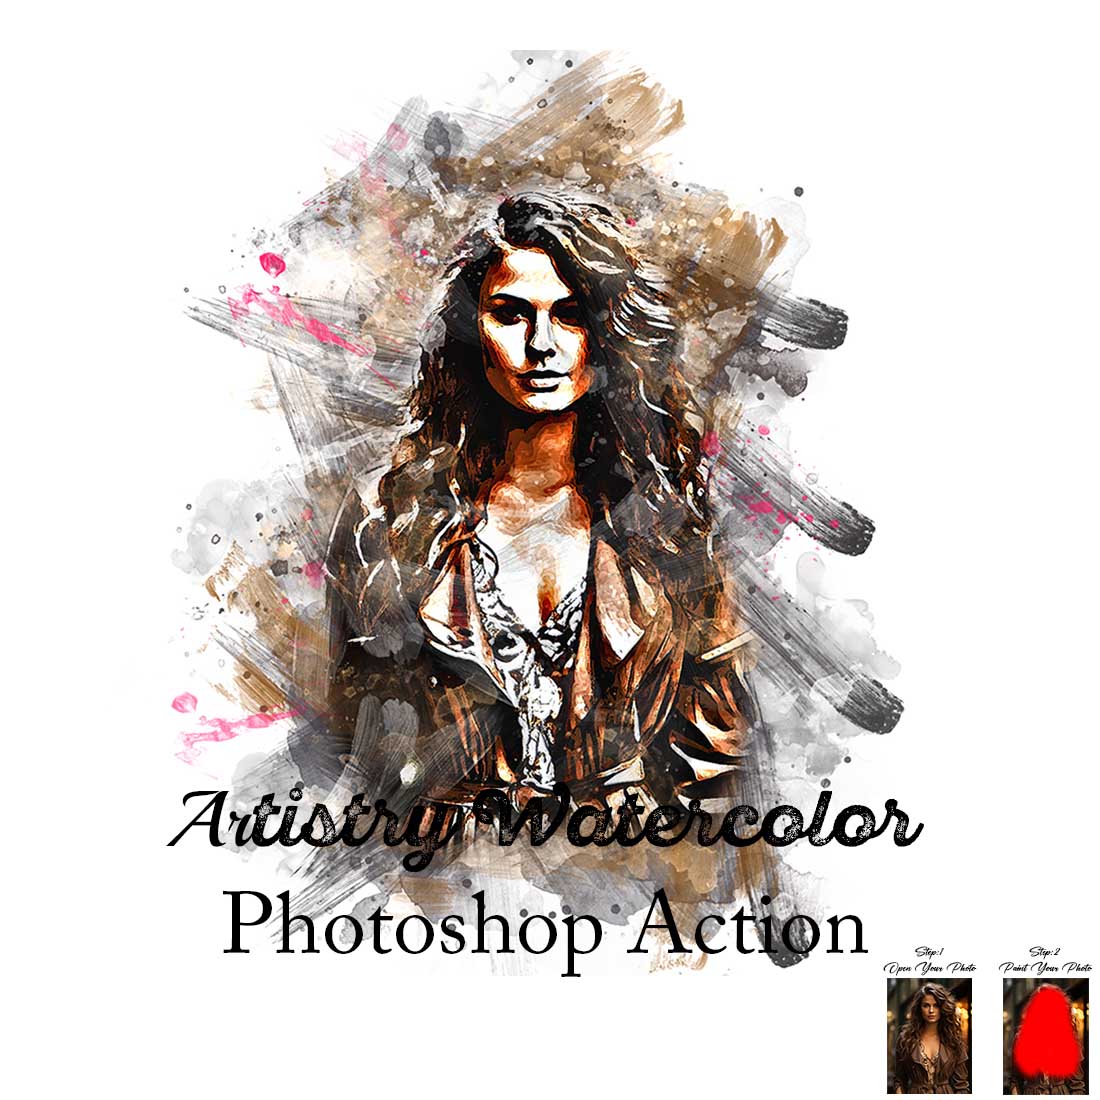 Artistry Watercolor Photoshop Action cover image.